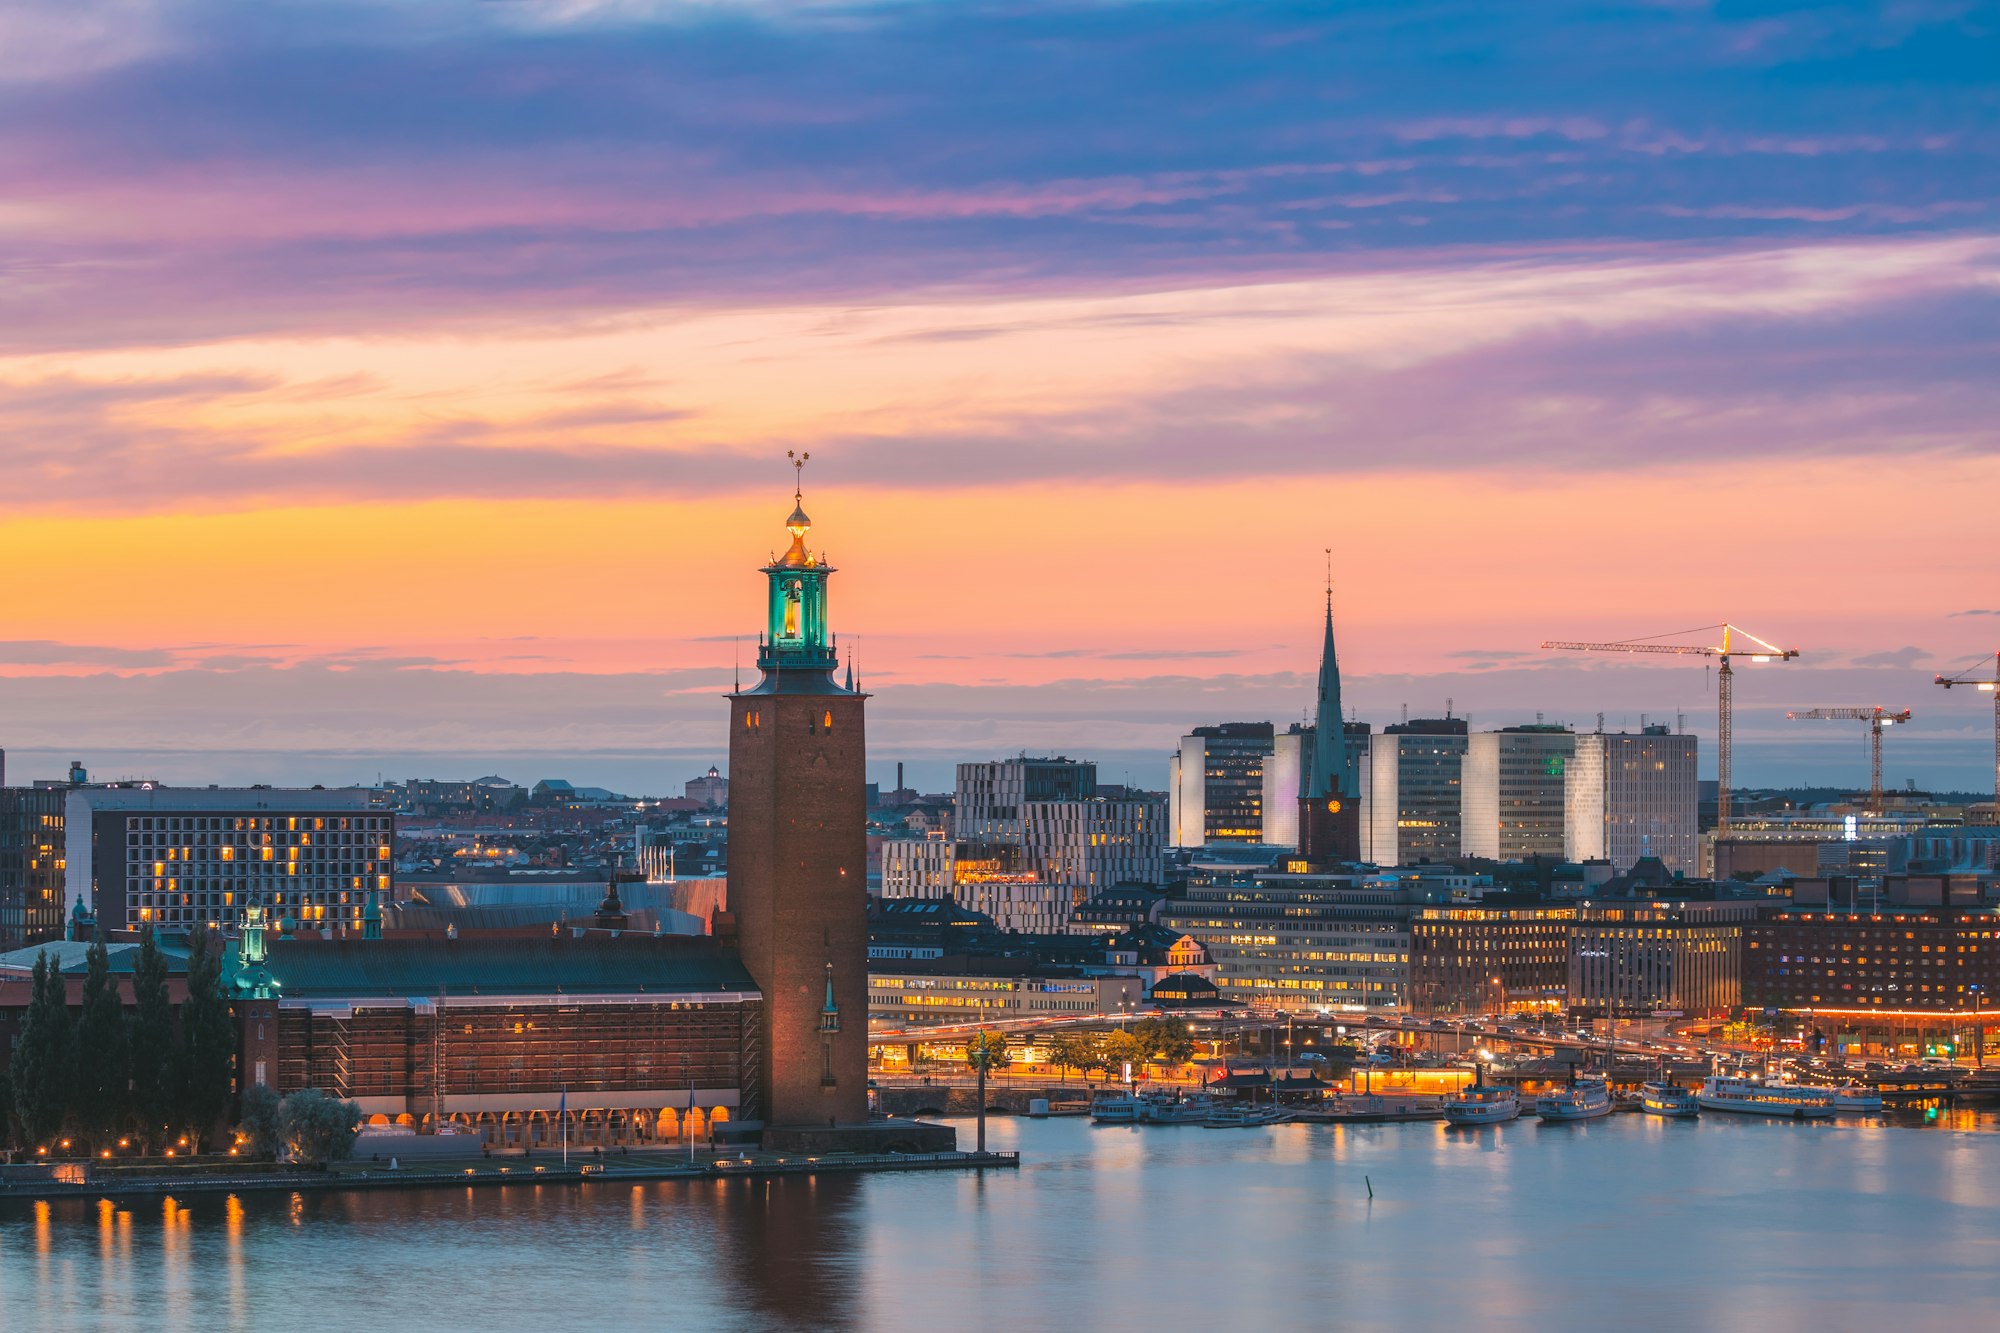 Stockholm, Sweden. Scenic Skyline View Of Famous Tower Of Stockholm City Hall And St. Clara Or Saint